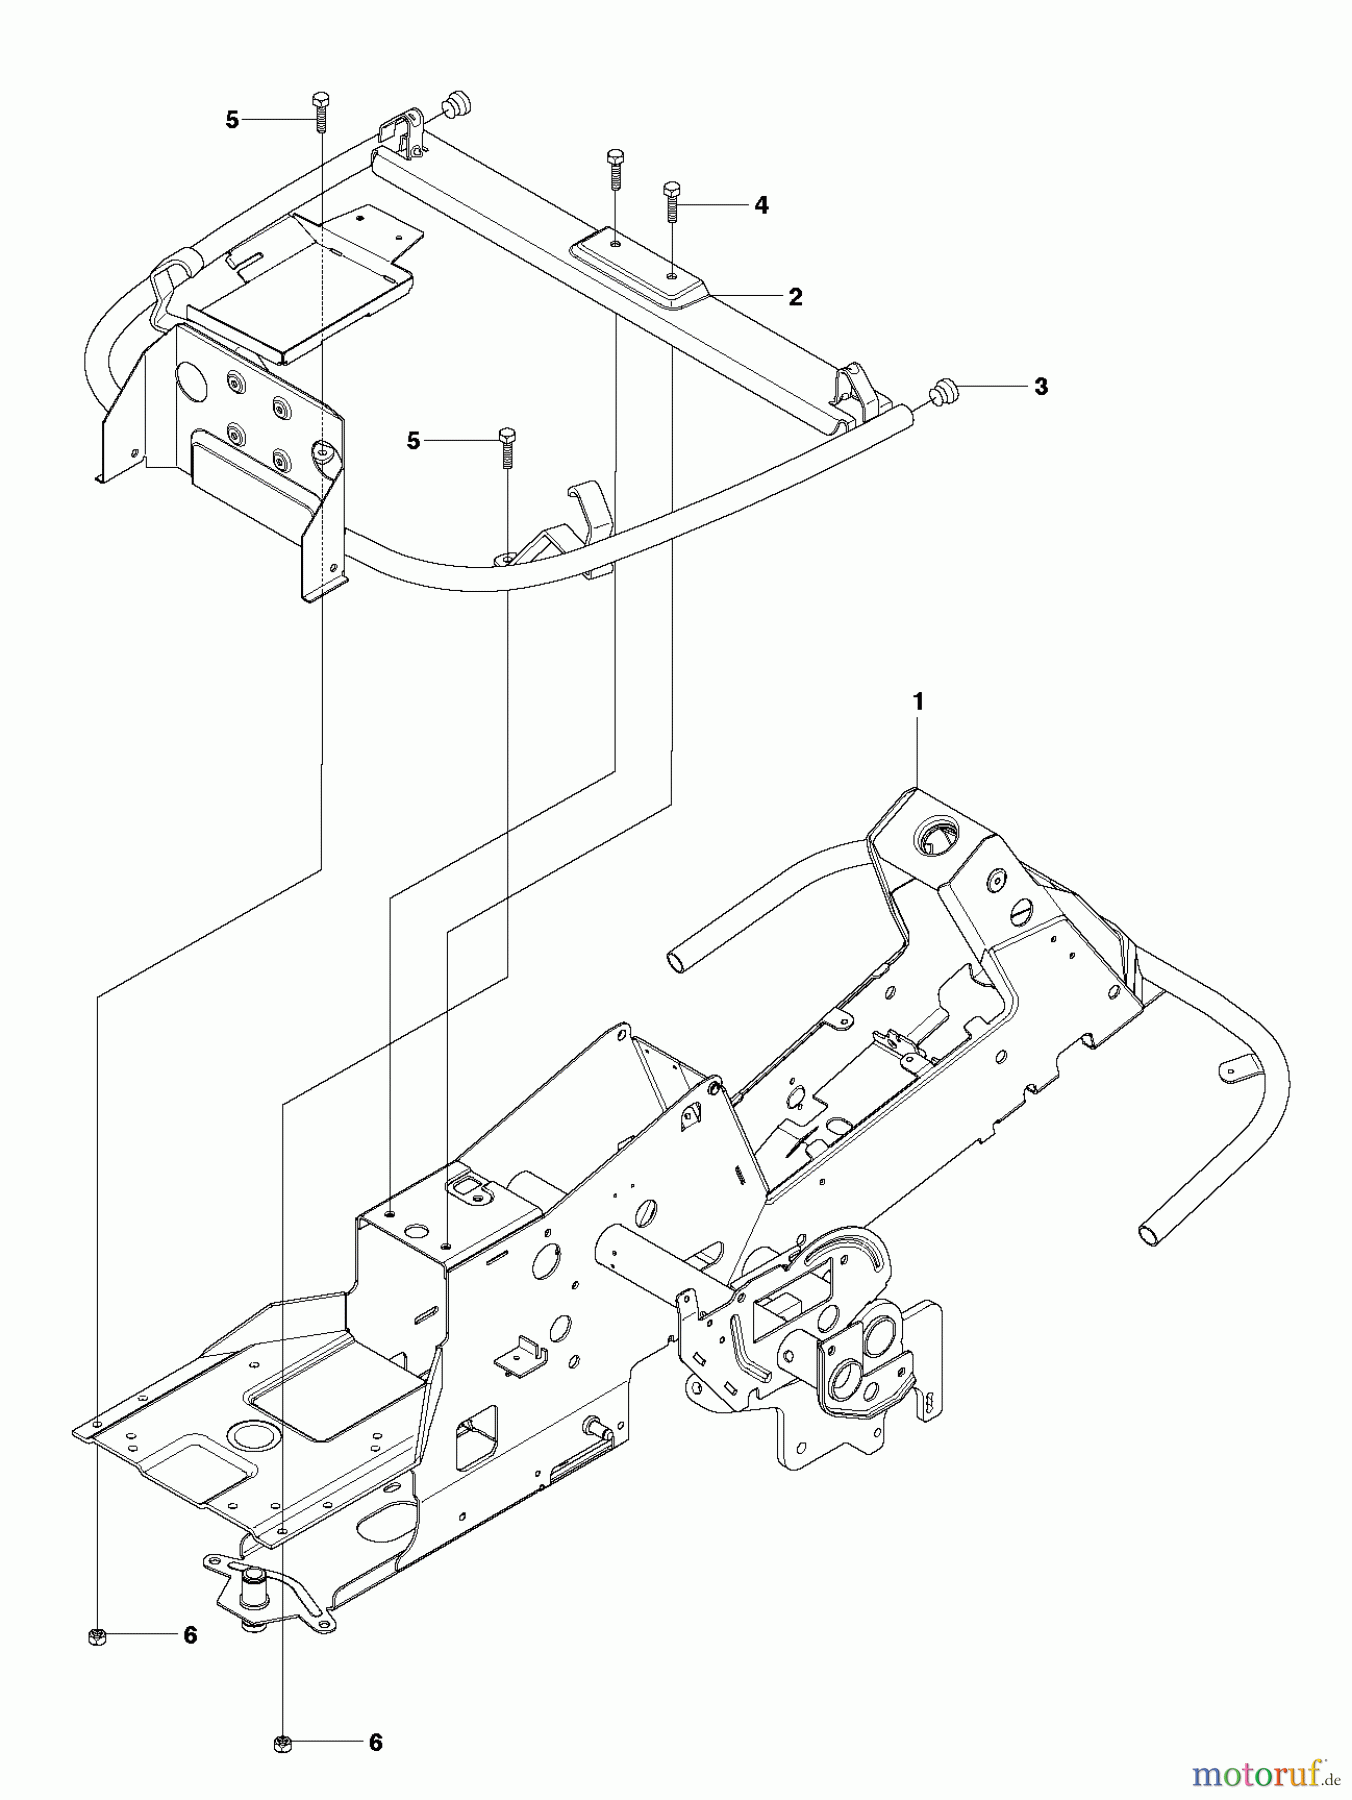  Jonsered Reitermäher FR2216 MA 4x4 (965190401) - Jonsered Rear-Engine Riding Mower (2010-07) CHASSIS ENCLOSURES